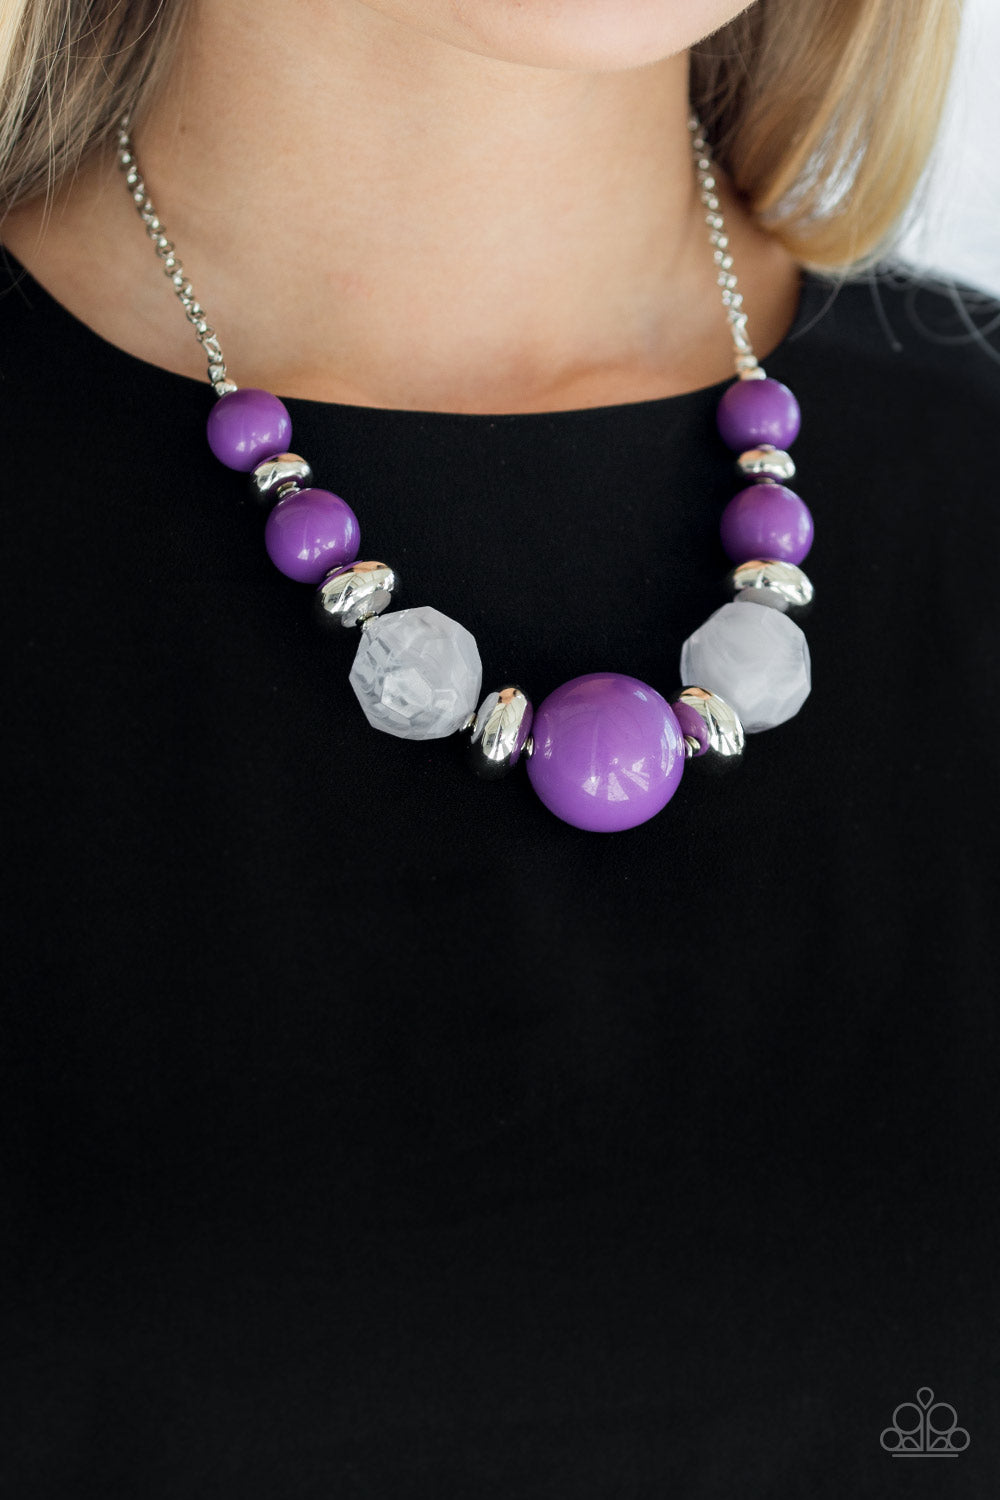 Paparazzi Accessories Daytime Drama - Purple Necklaces - Lady T Accessories